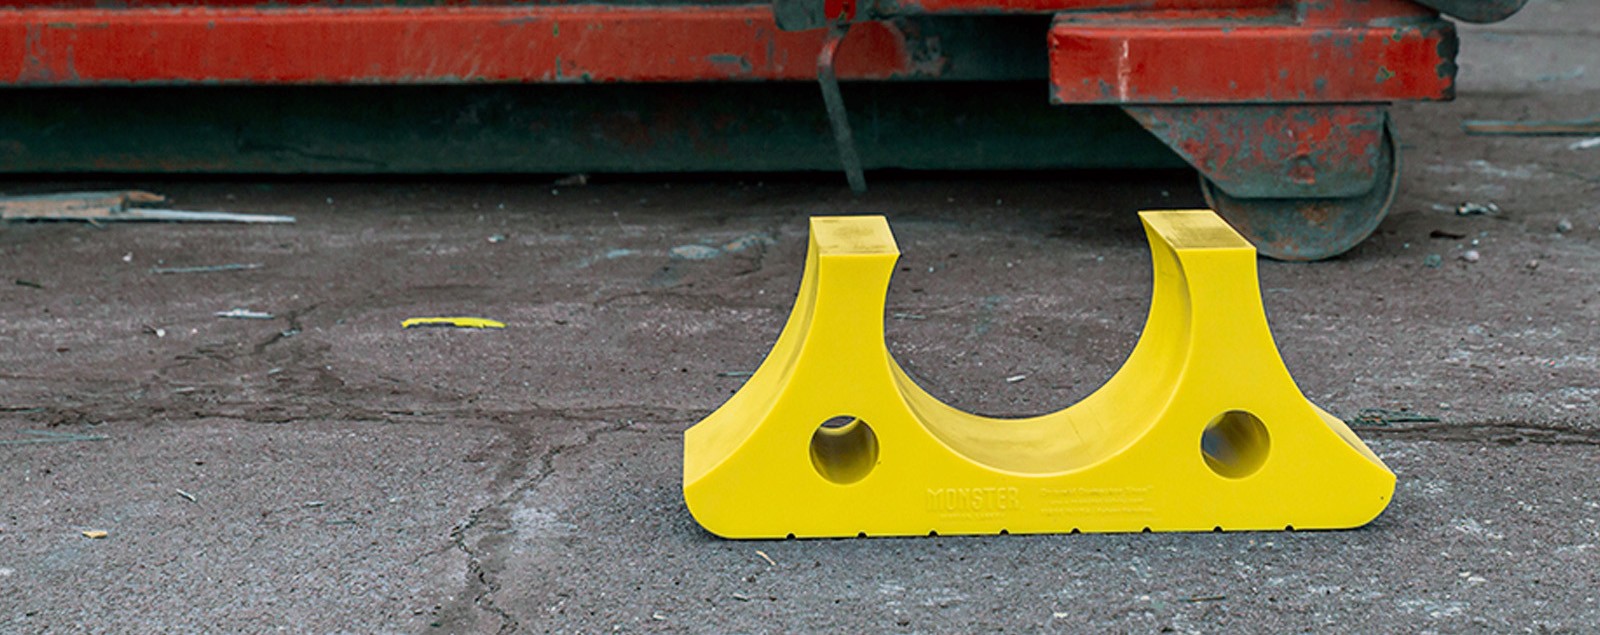 Ground Protector for Dumpsters